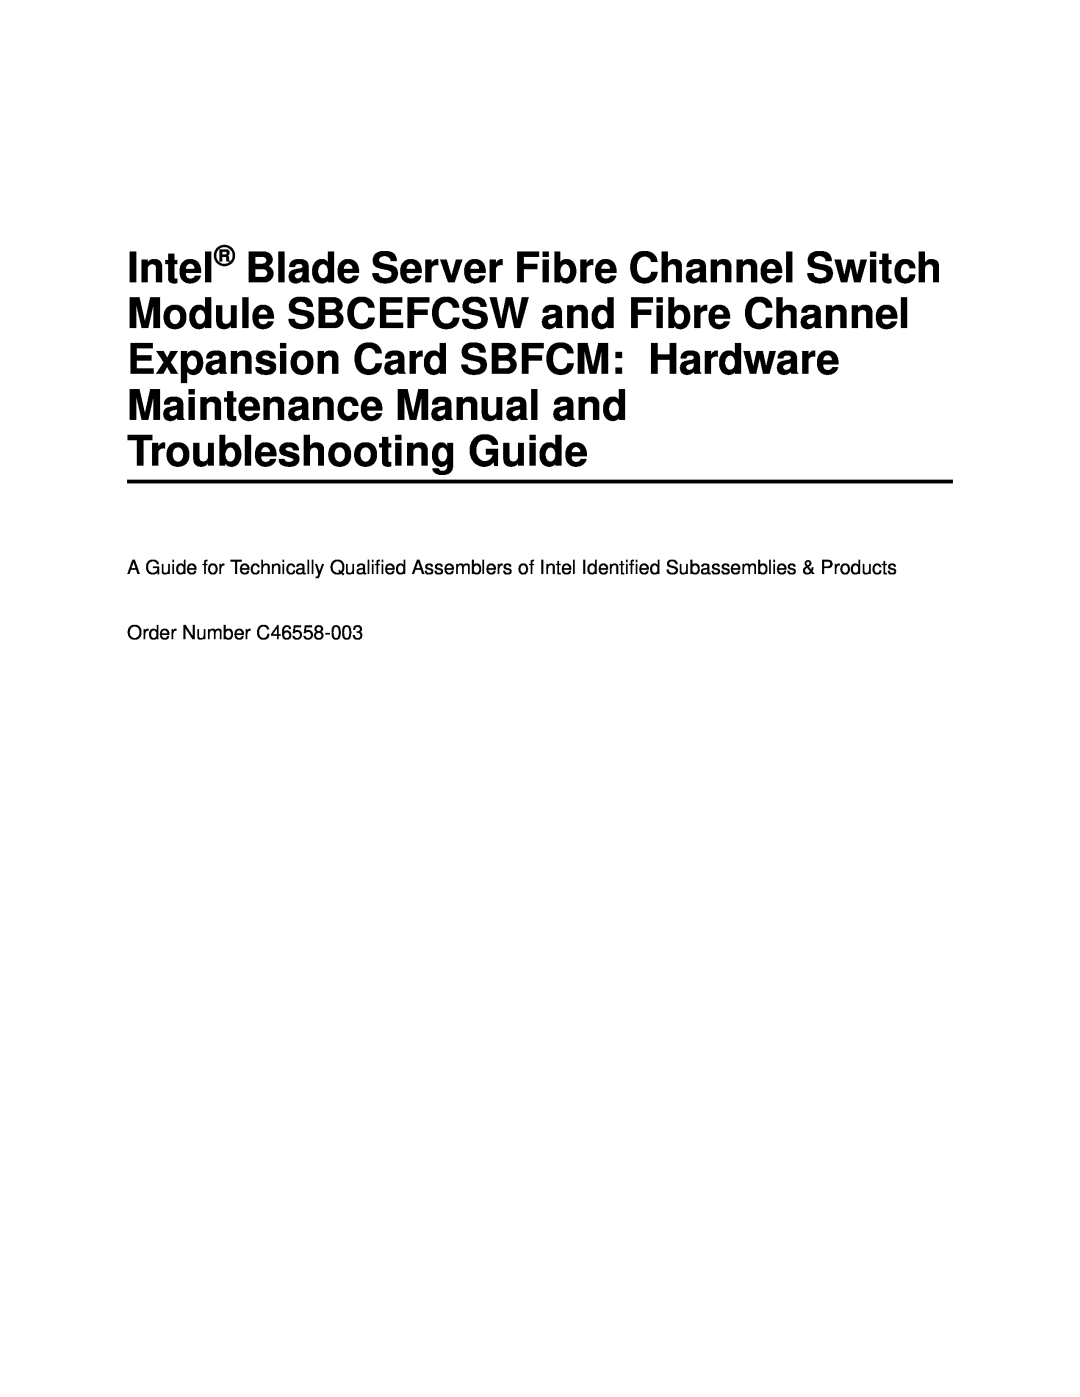 Intel manual Intel Blade Server Fibre Channel Switch, Module SBCEFCSW and Fibre Channel, Expansion Card SBFCM Hardware 